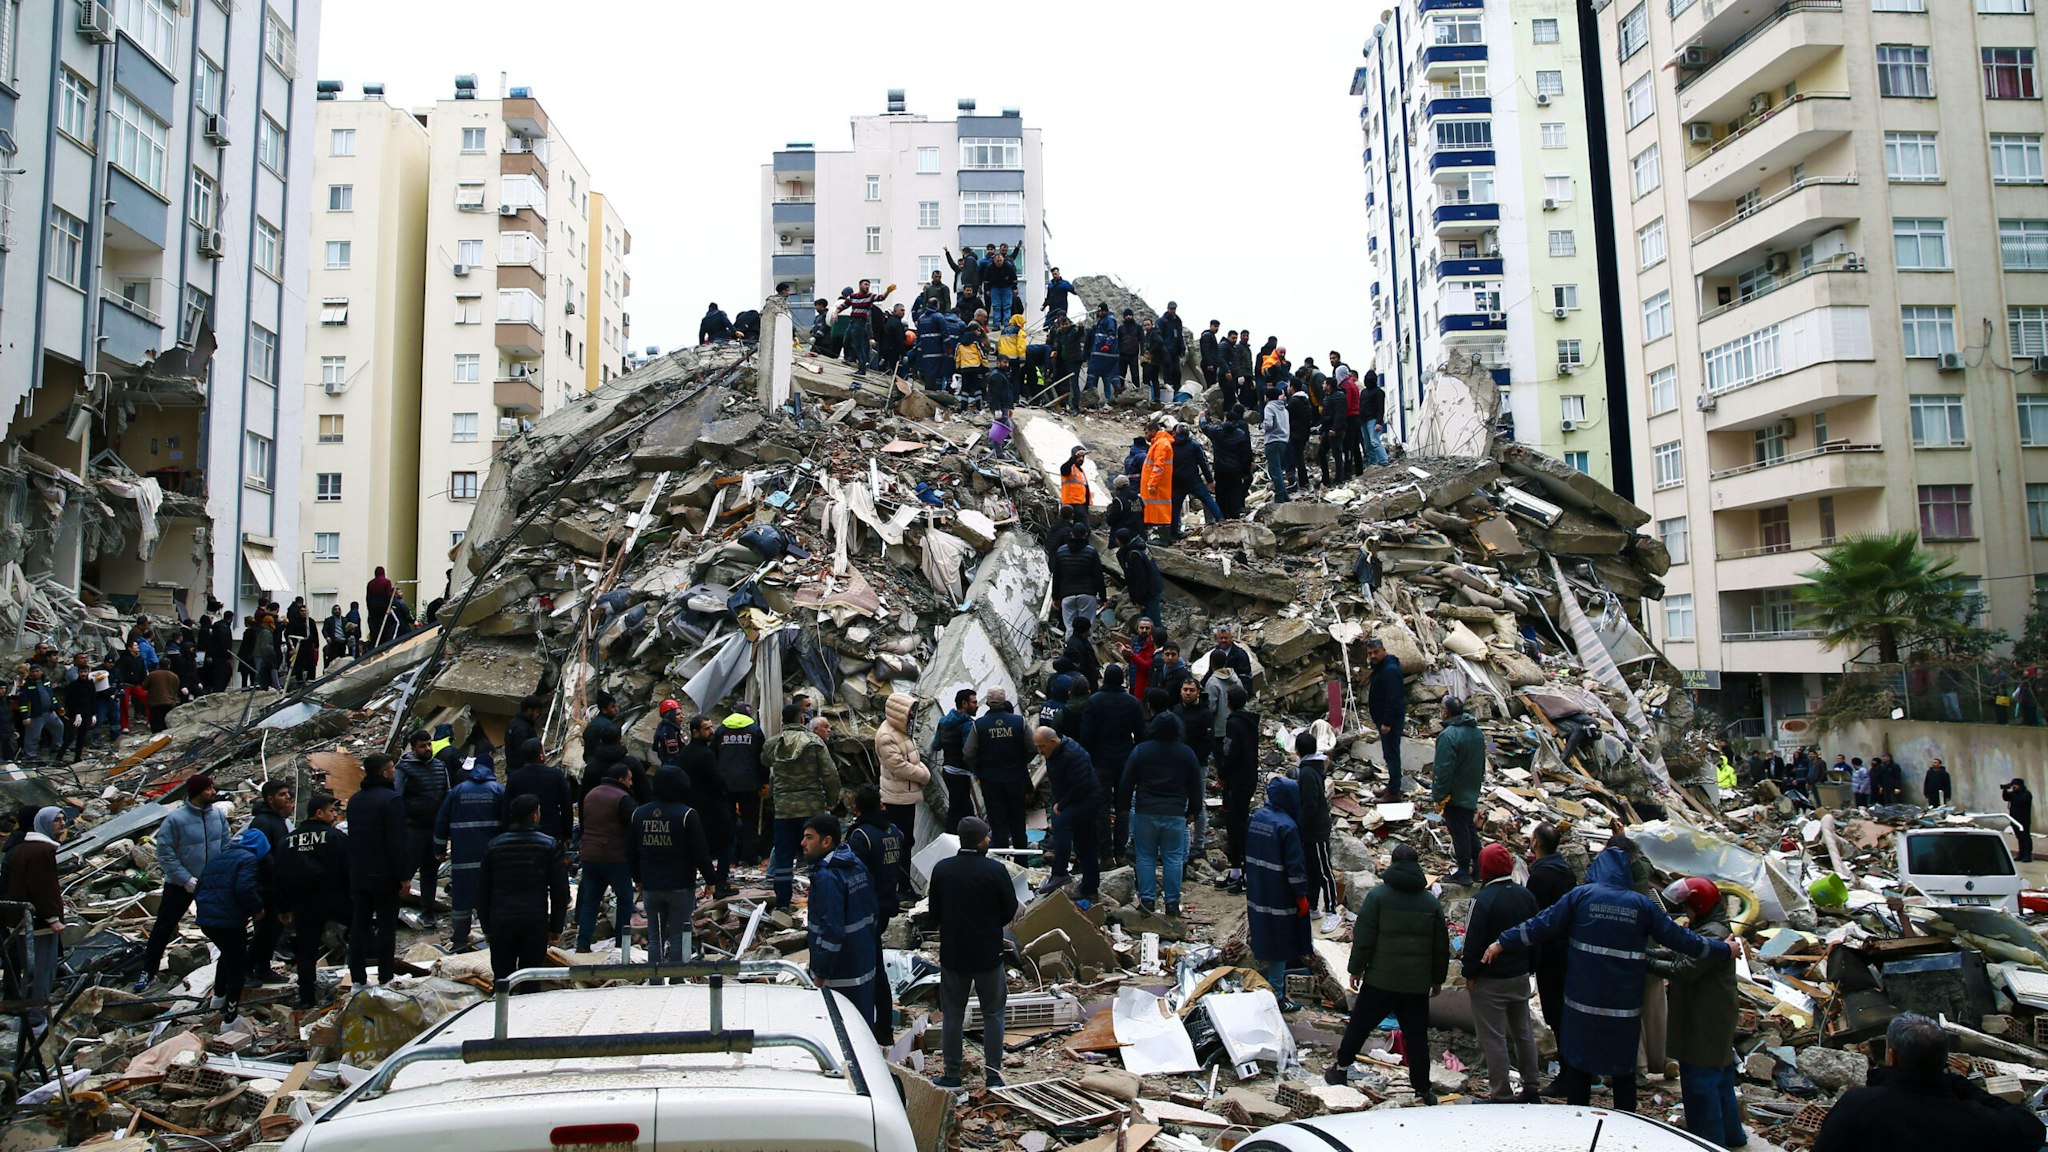 ADANA, TURKIYE - FEBRUARY 06: Search and rescue operation is being carried out at the debris of a building in Cukurova district of Adana after a 7.4 magnitude earthquake hit southern provinces of Turkiye, in Adana, Turkiye on February 6, 2023.